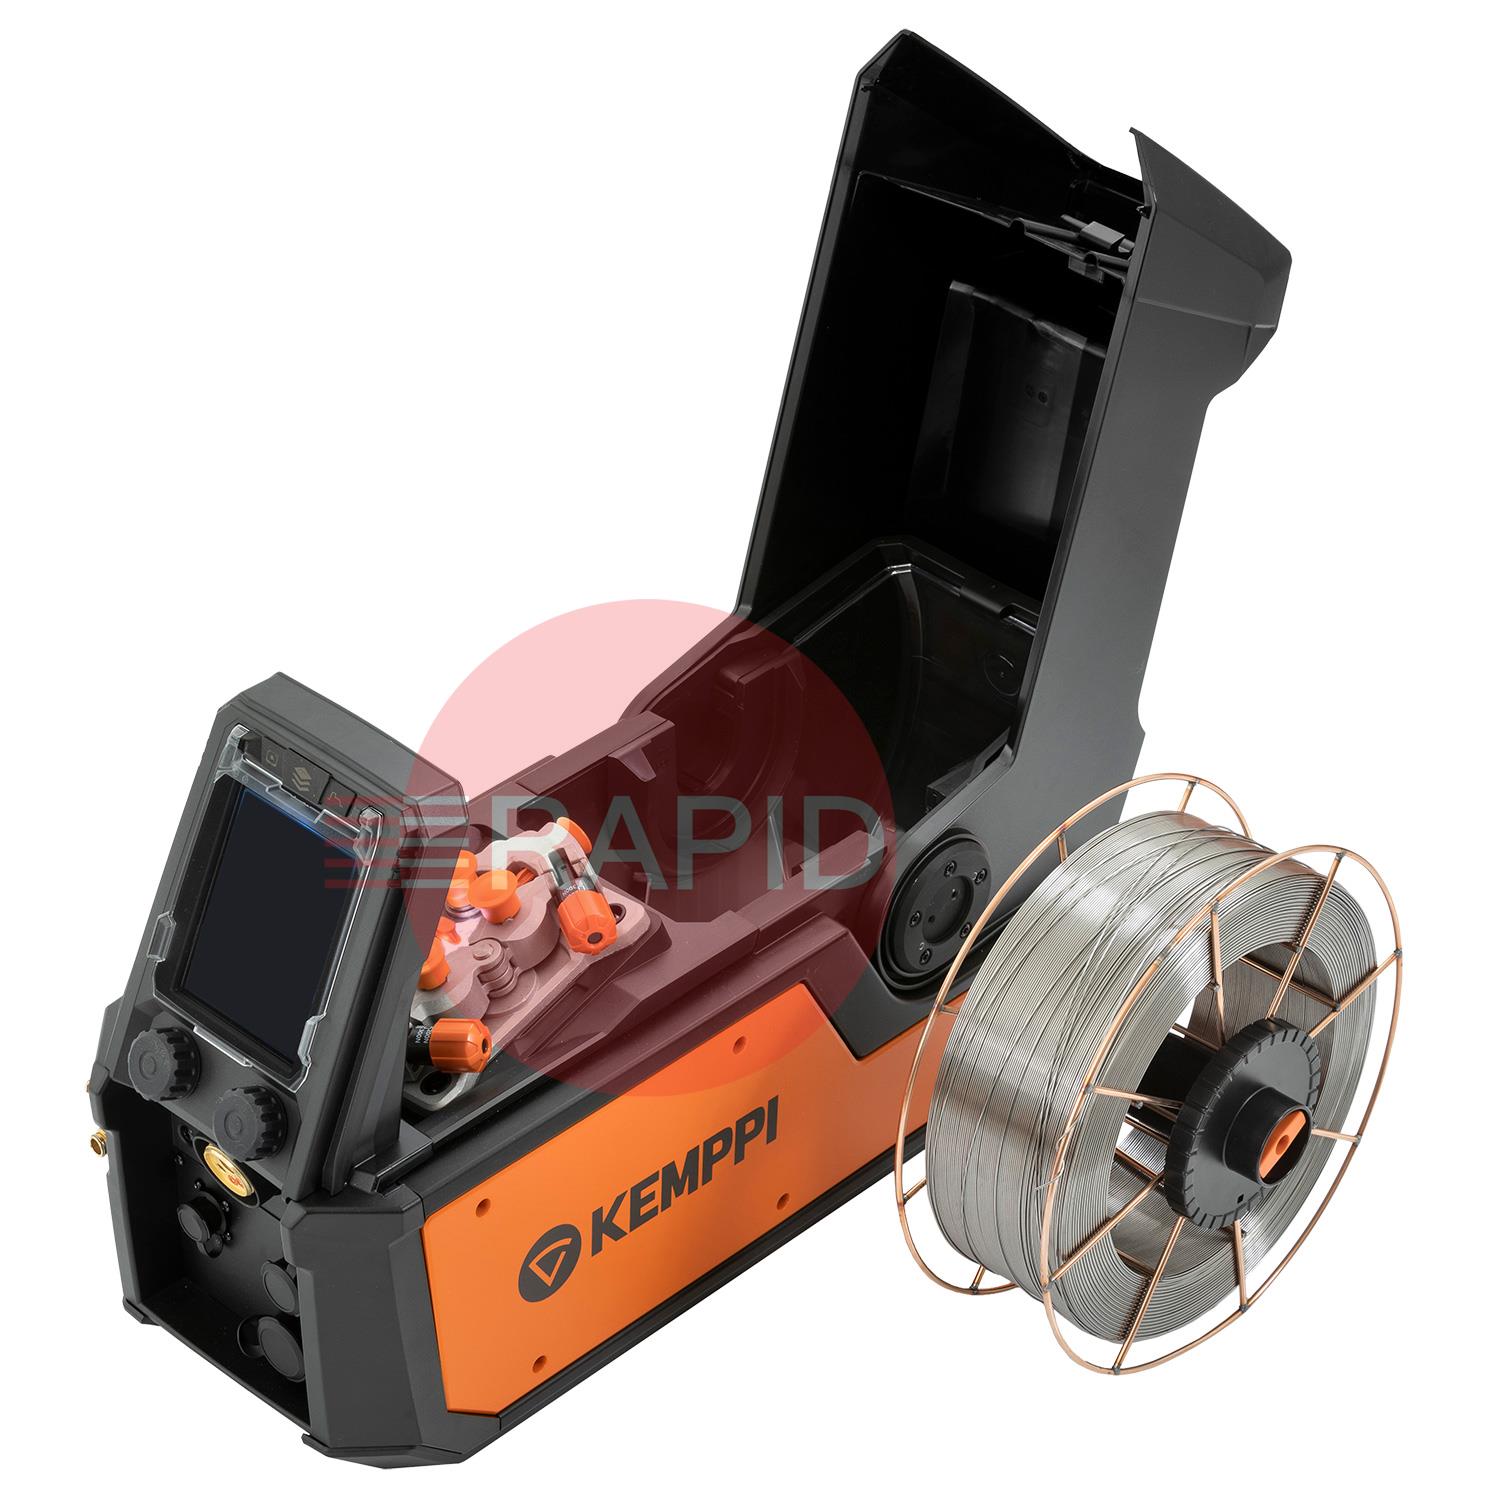 X5110400010SPK  Kemppi X5 FastMig 400 Synergic 3 Phase 400v MIG Package, with Flexlite GXe 405 3.5m Torch